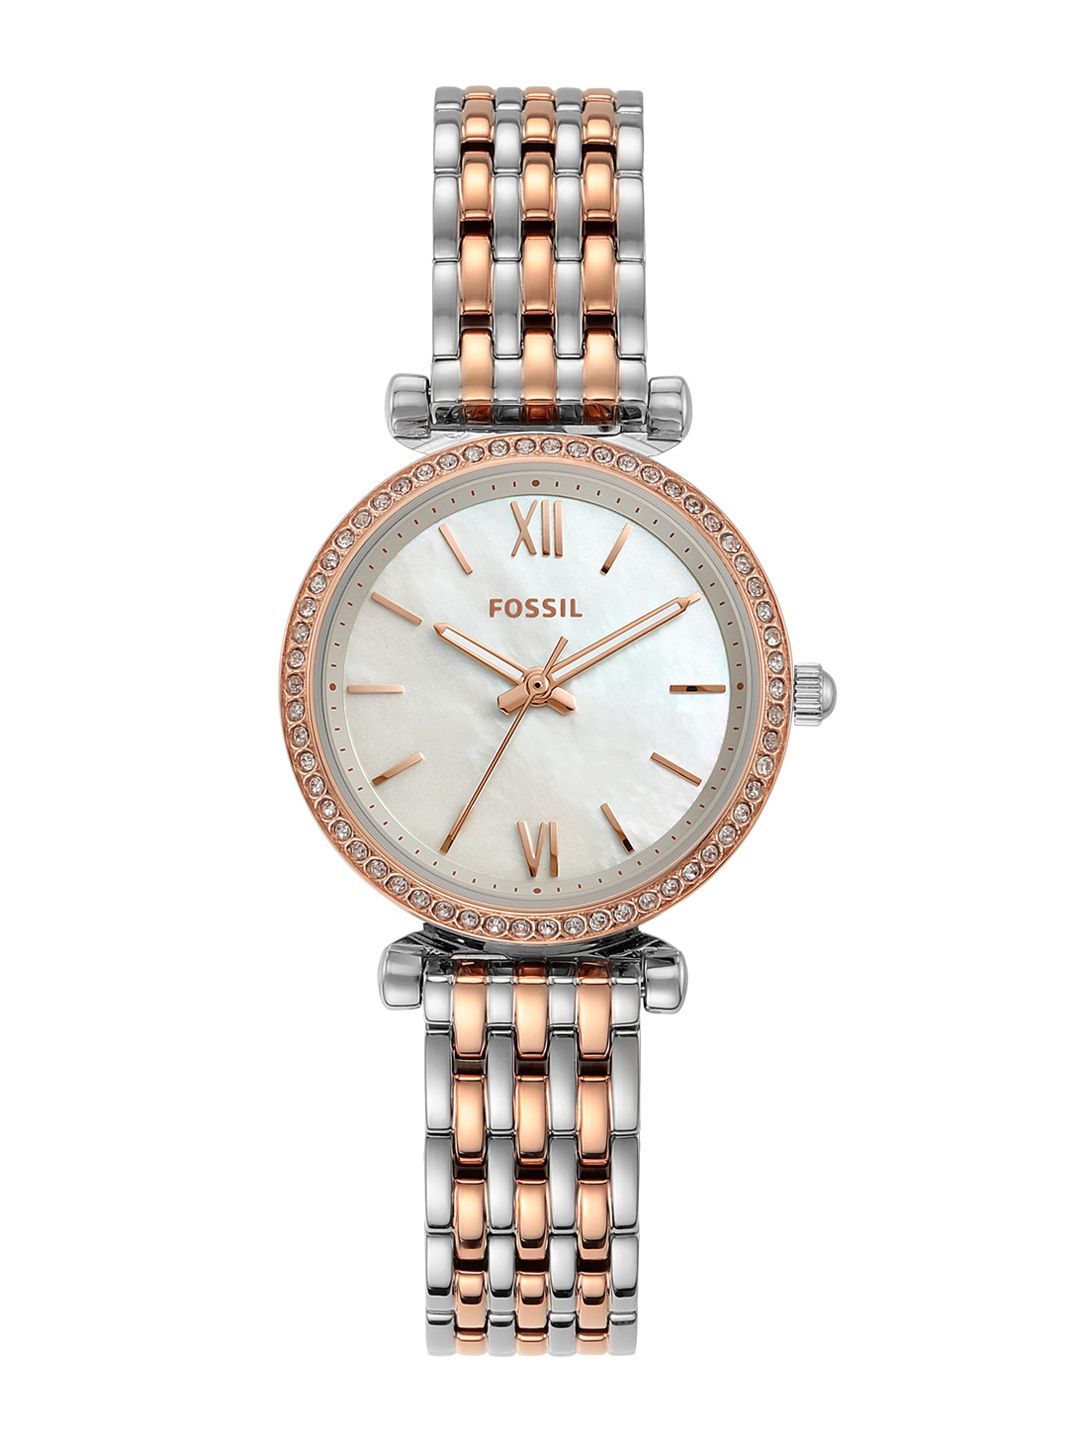 Fossil Women Silver-Toned Analogue Watch ES4649 Price in India